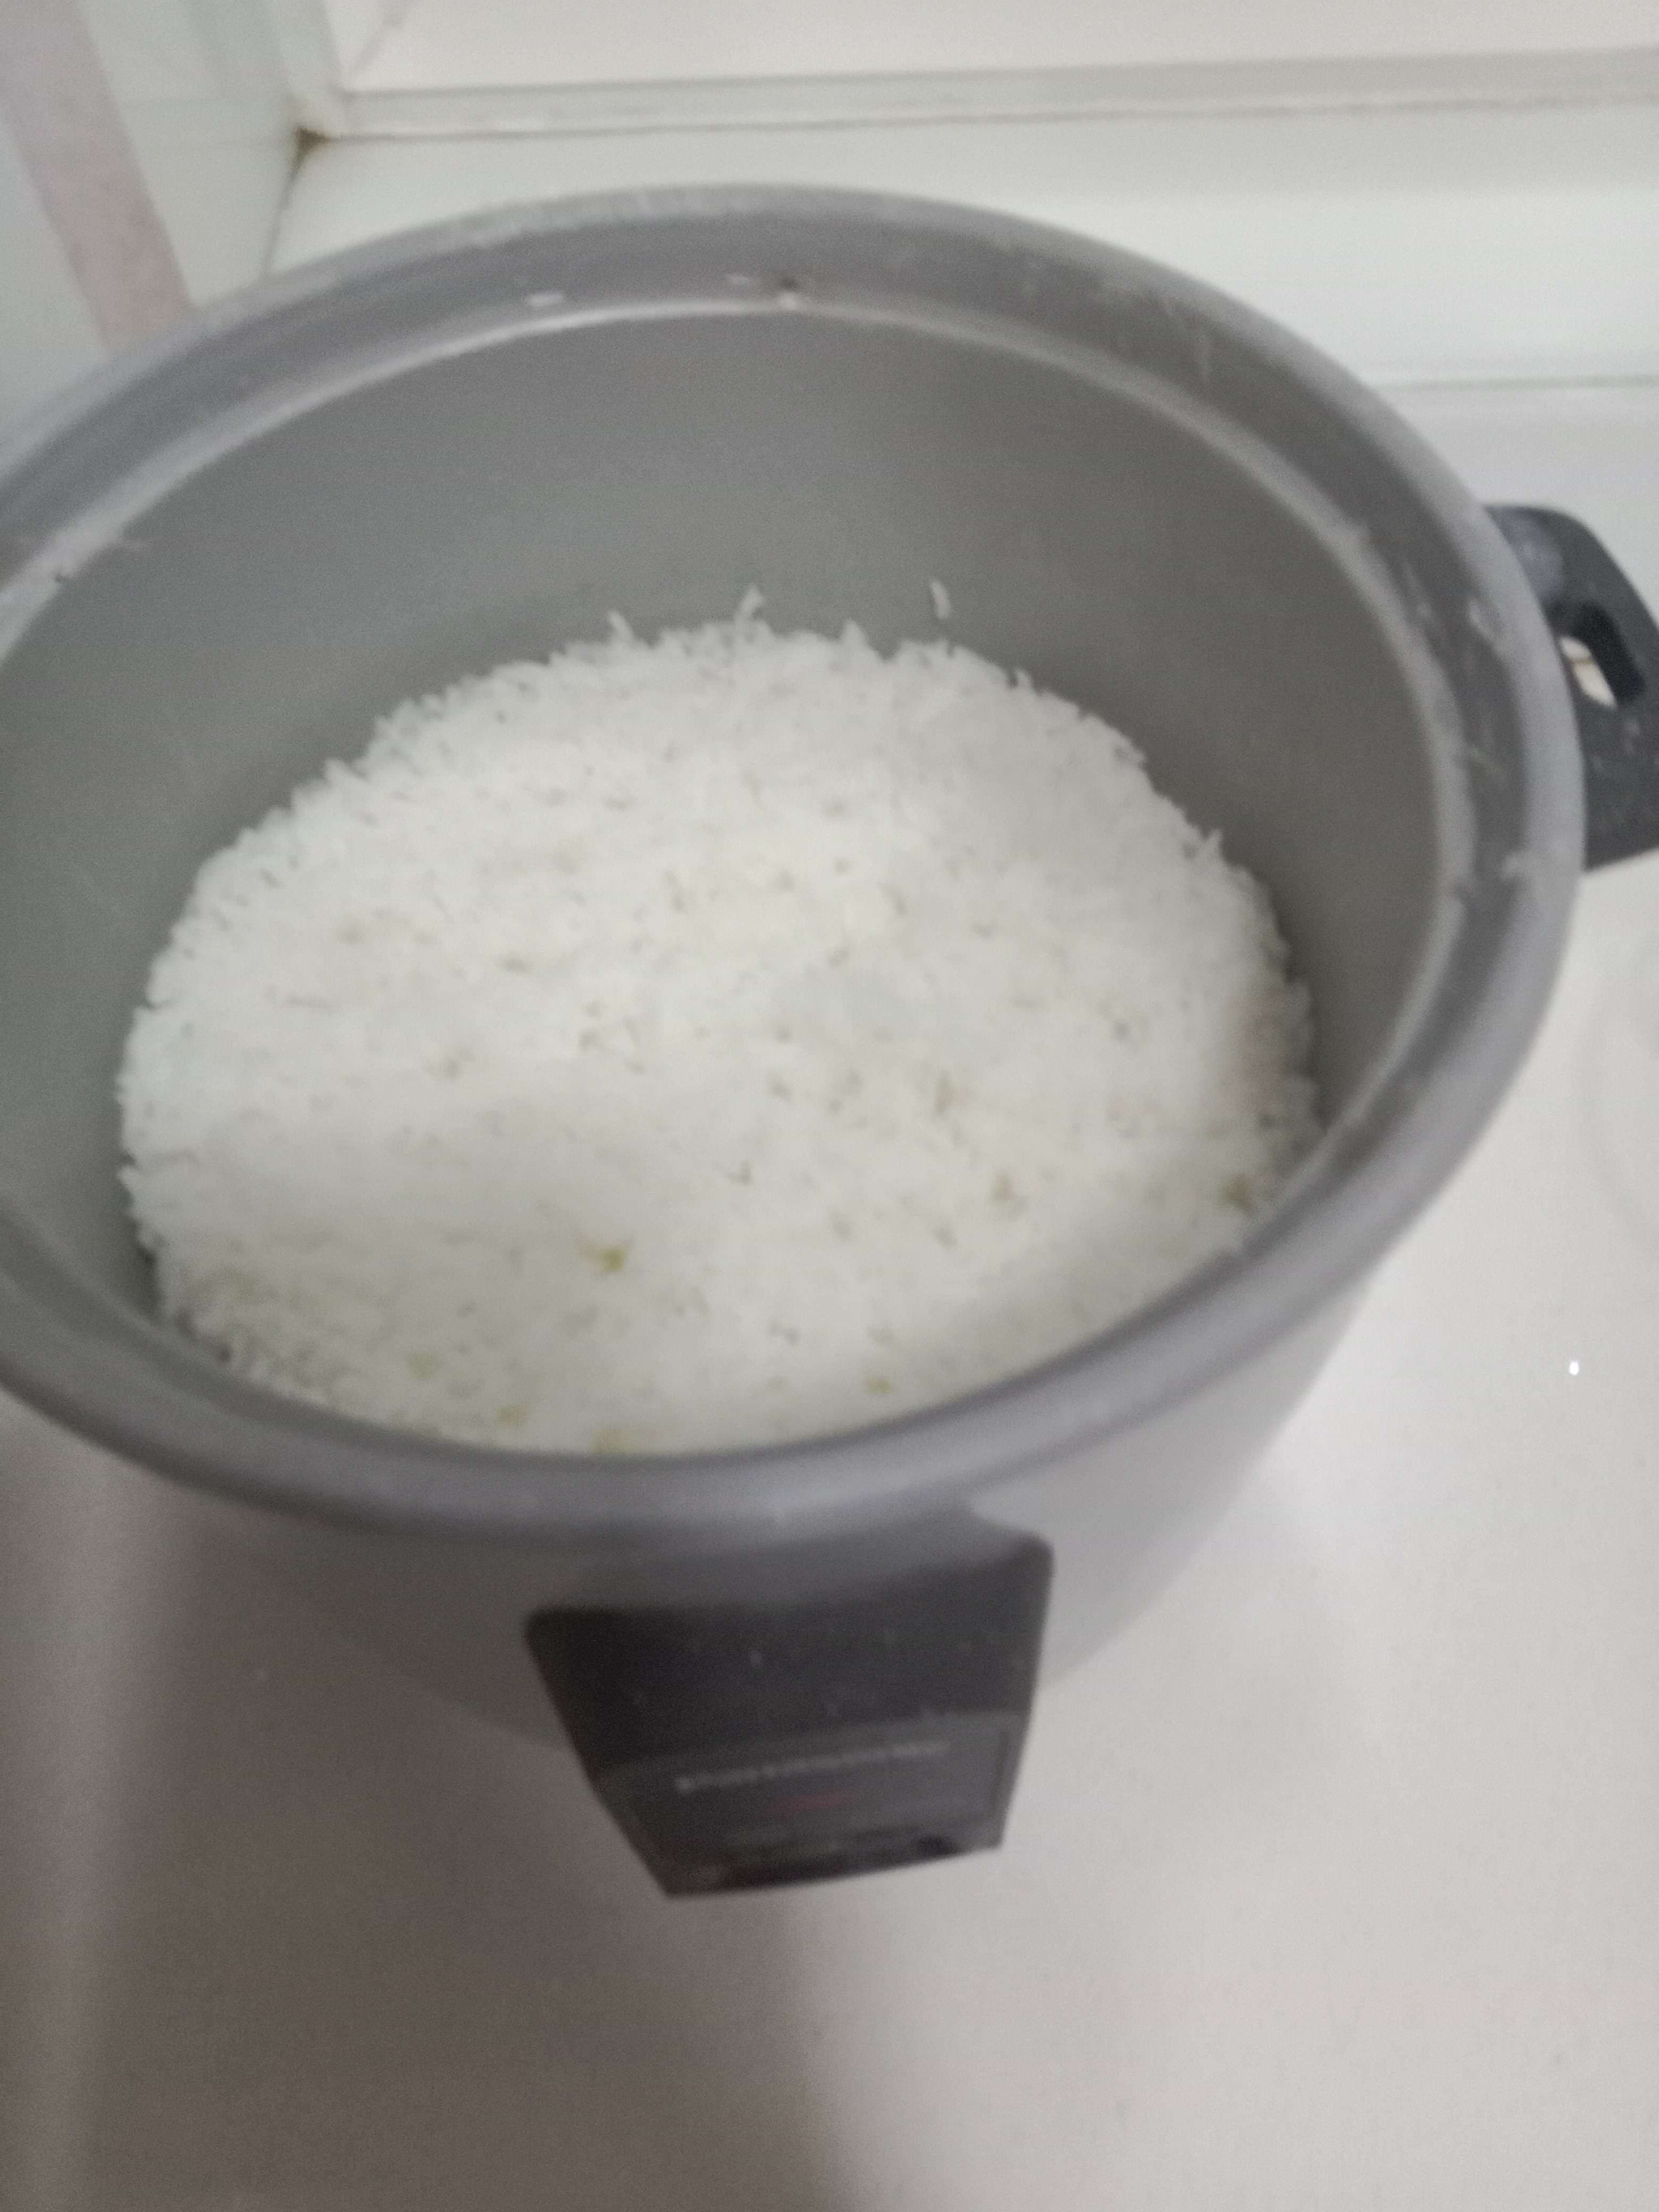 Tasty Sticky Rice cooked by COOX chefs cooks during occasions parties events at home